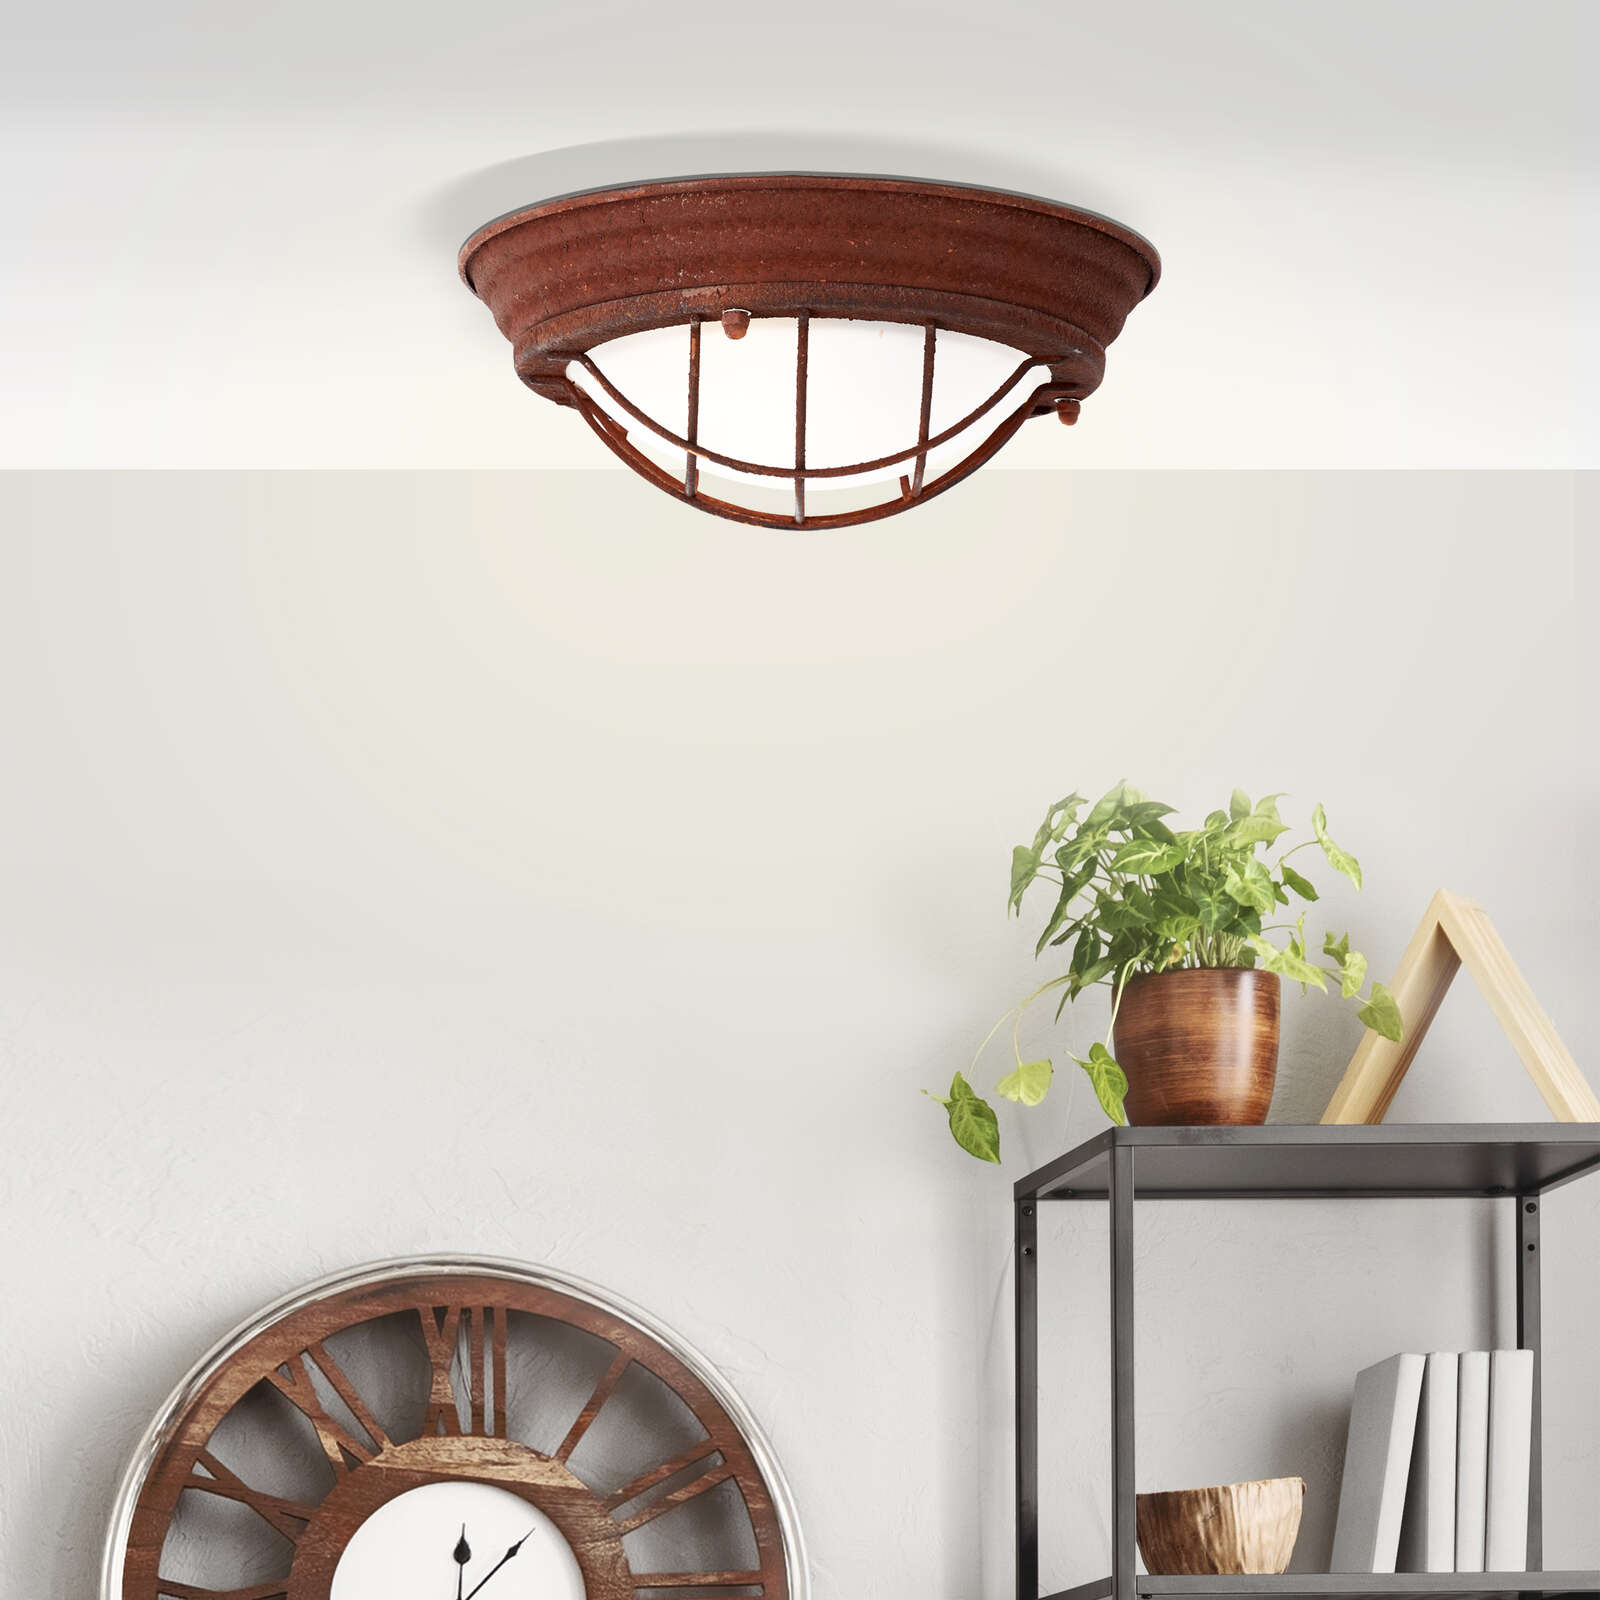             Metal wall and ceiling light - Sina 5 - Brown
        